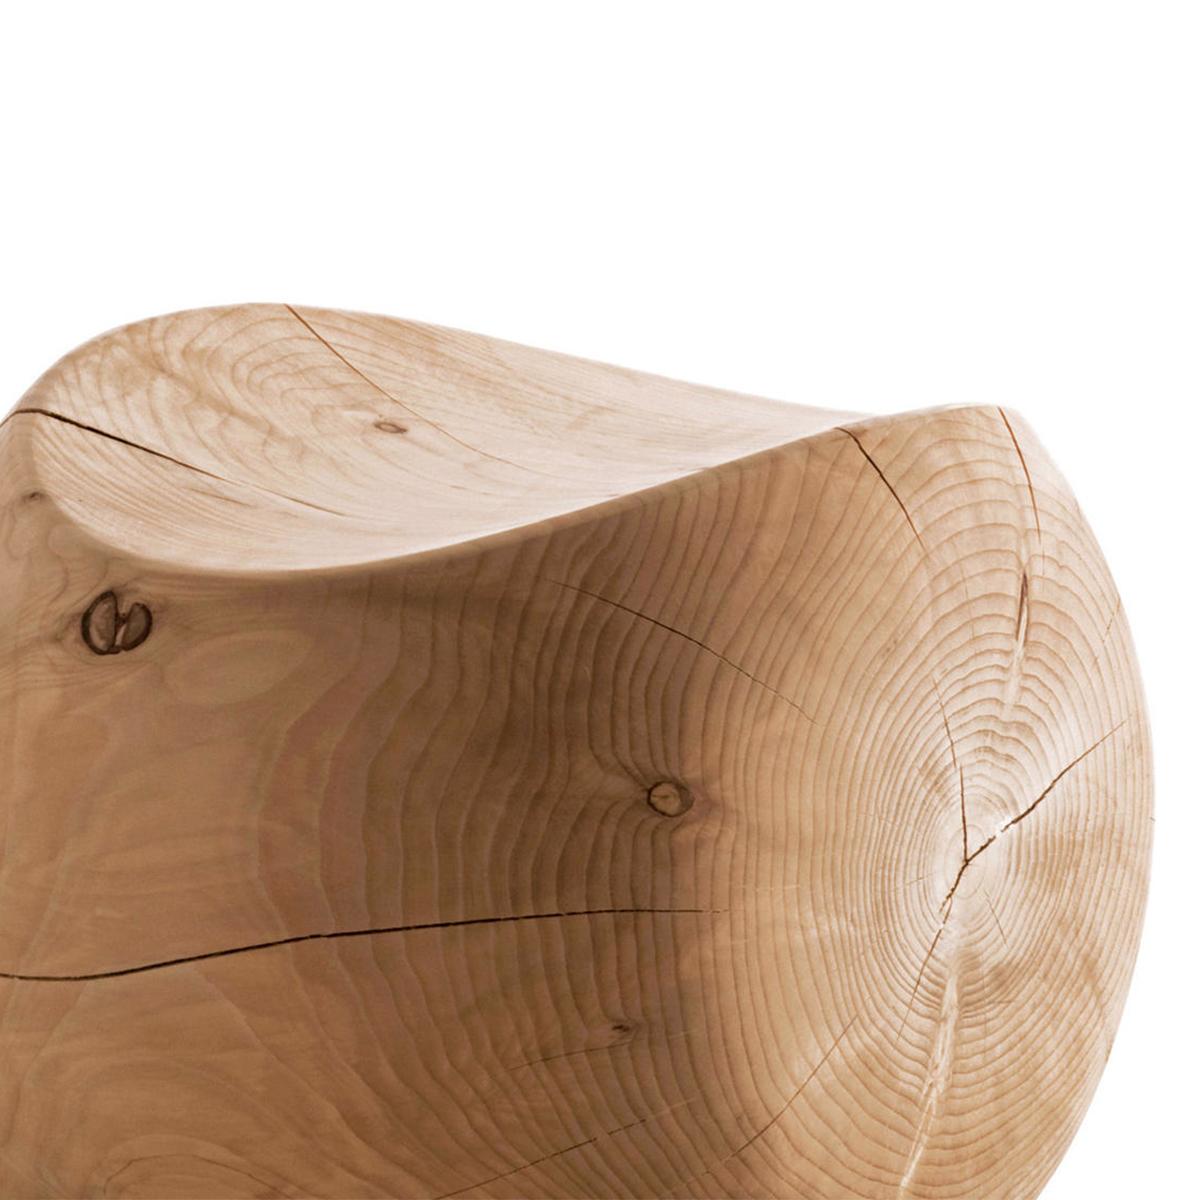 Stool Cocoona shape 1 in solid natural aromatic
cedar wood. Made in one block of cedar wood.
Treated with natural pine extracts.
Can be used in the 3 faces of the stool.
Solid cedar wood include movement, 
cracks and changes in wood conditions,